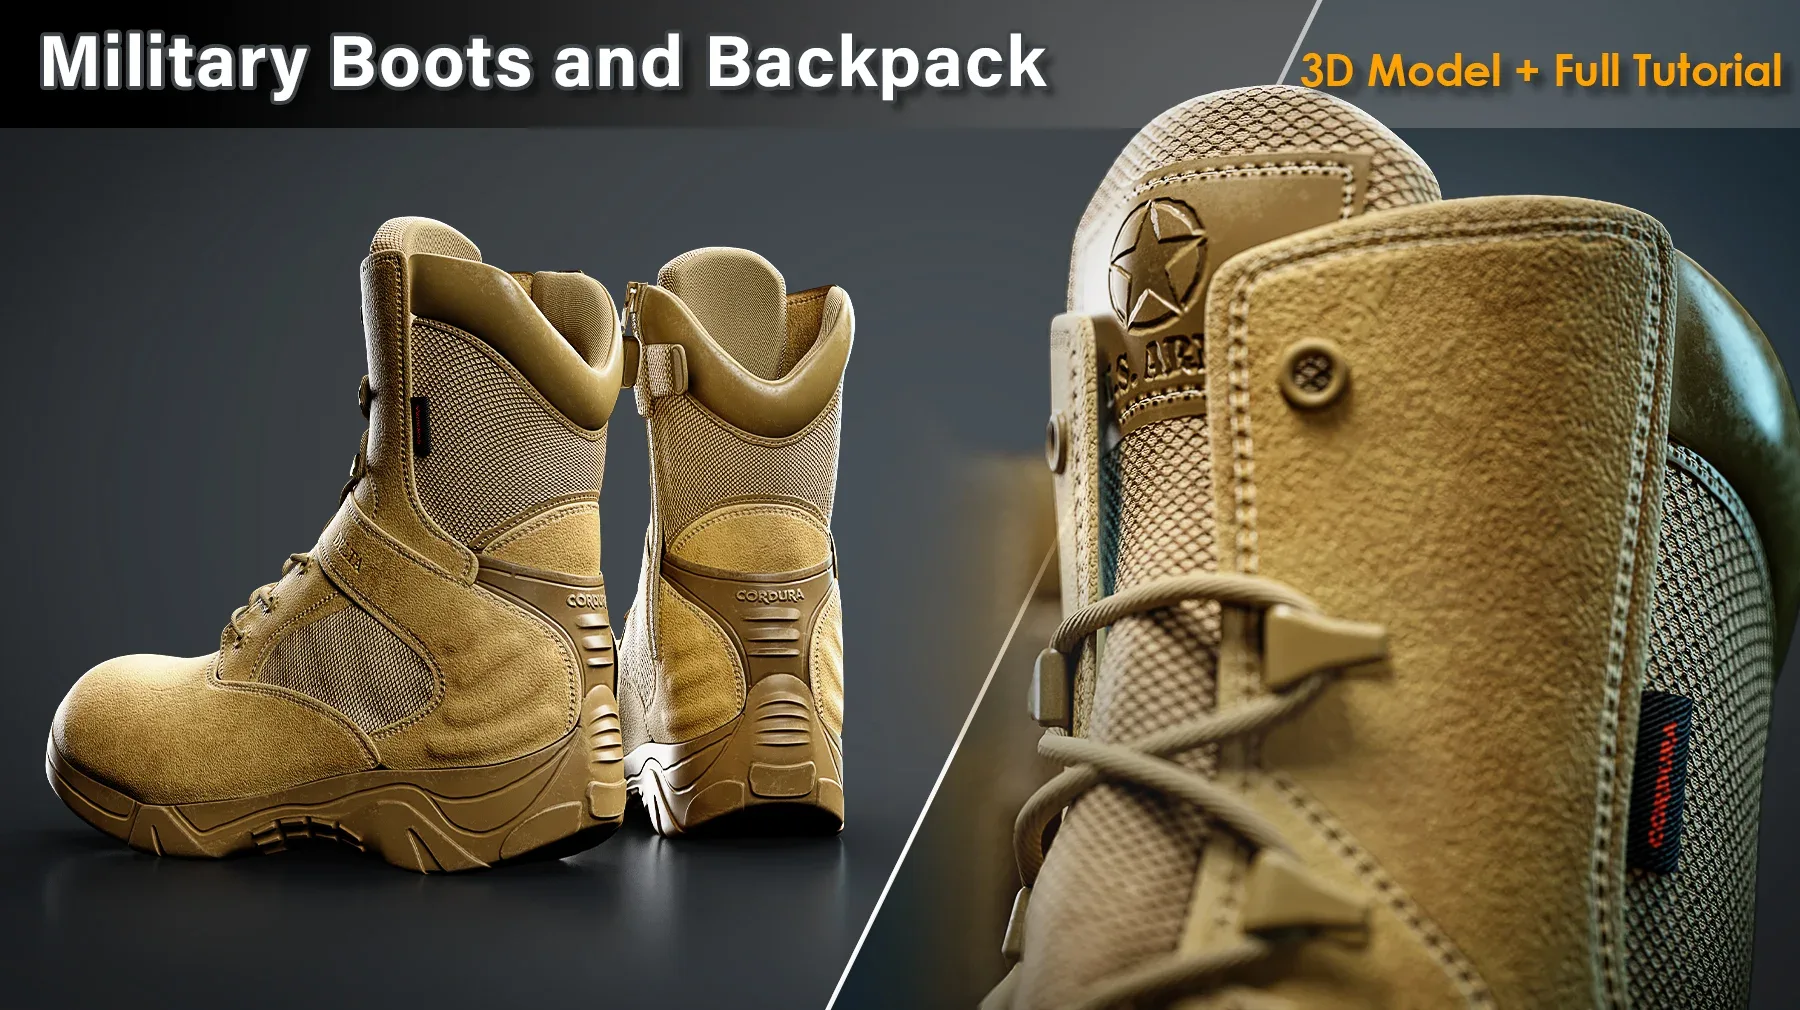 Military Boots and Backpack / Full Tutorial + 3D File